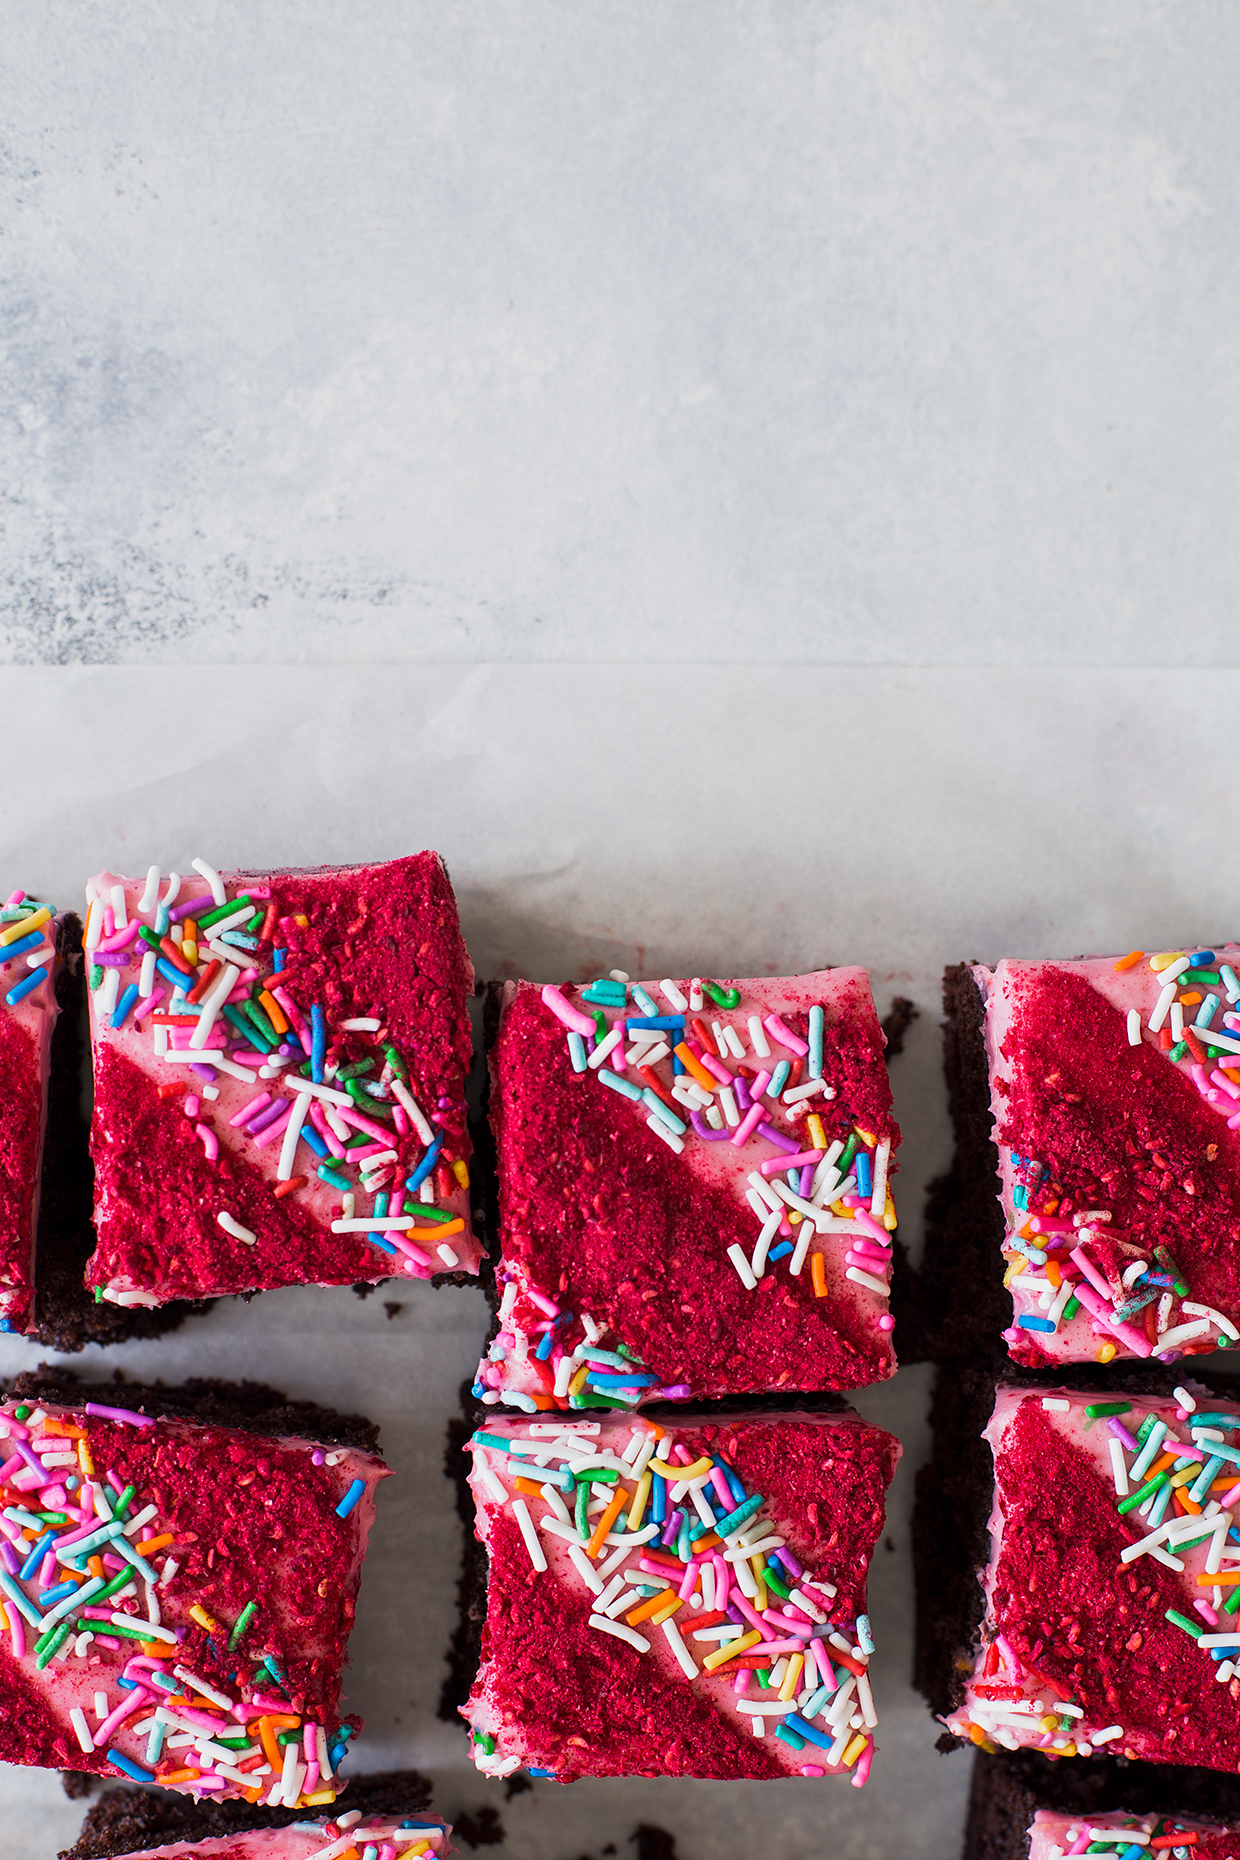 Chocolate Snack Cake with Raspberry Cream Cheese Frosting